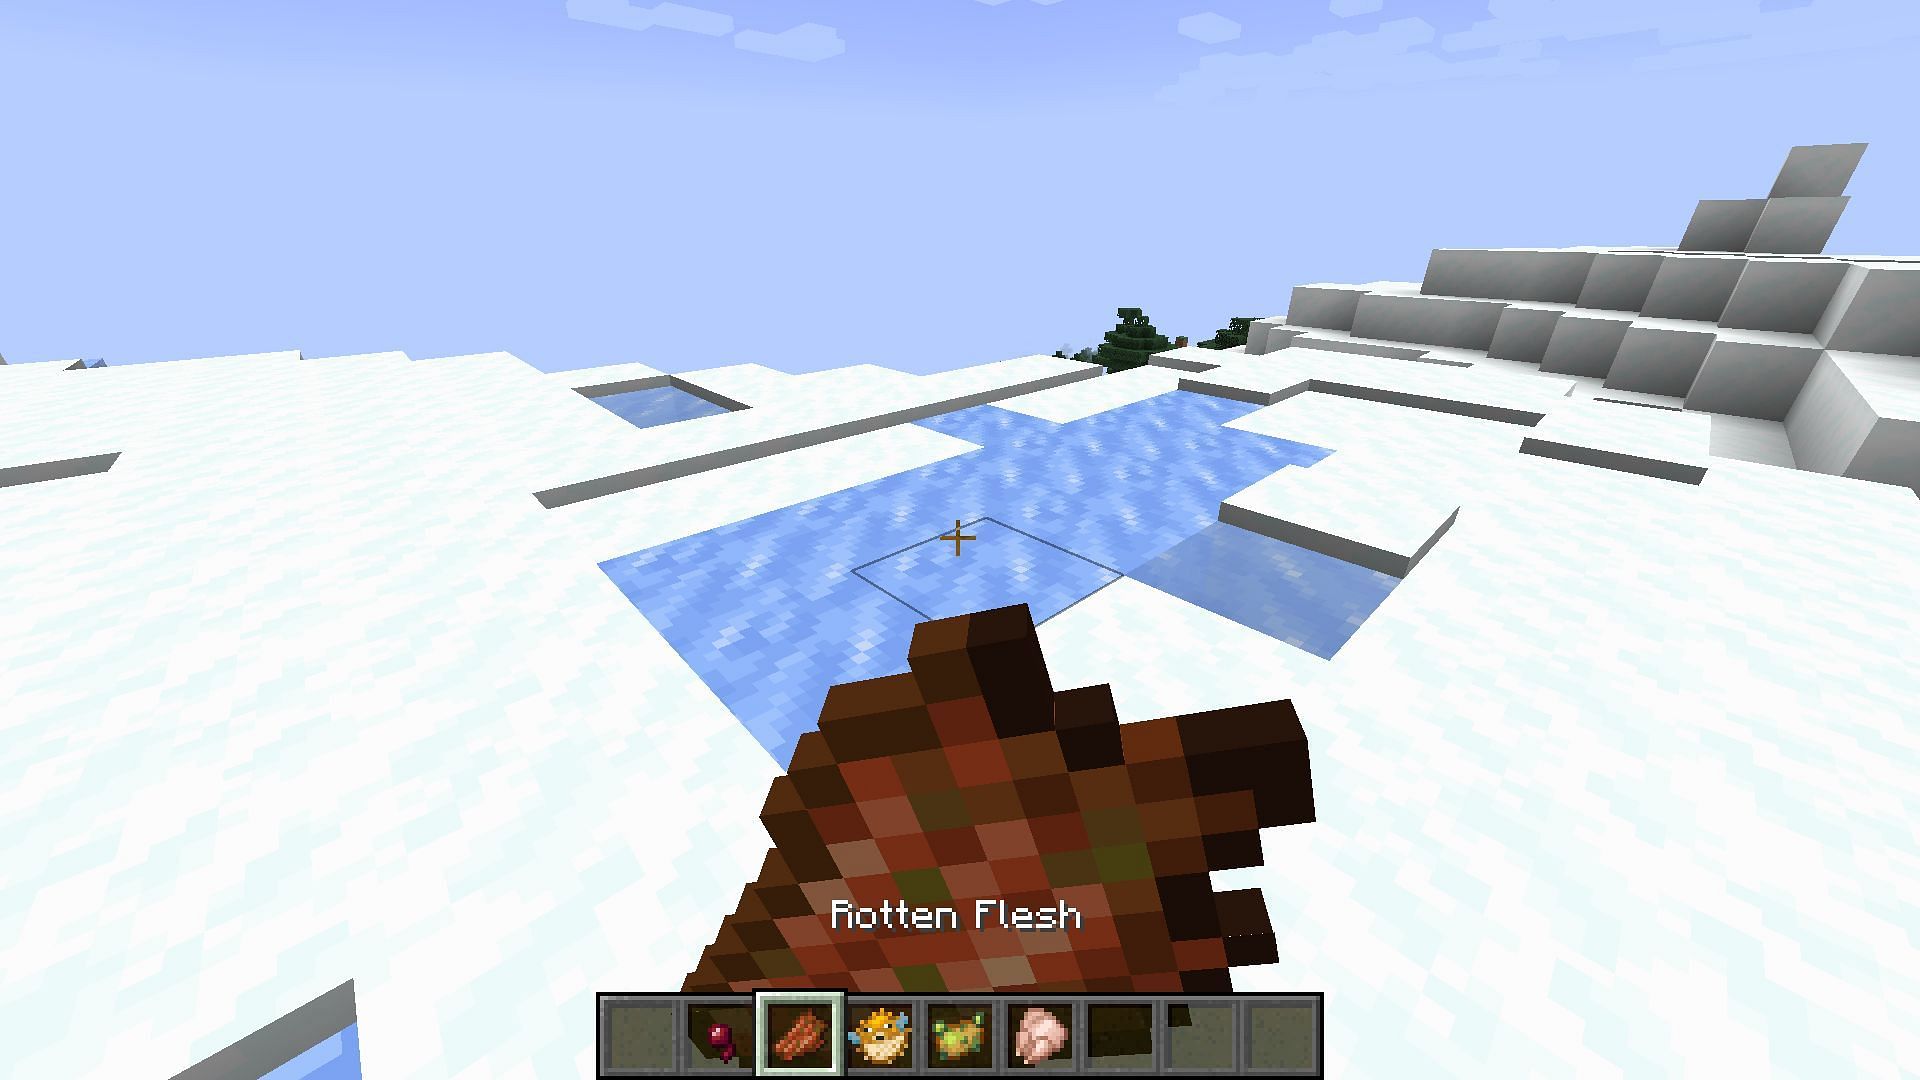 Rotten flesh can save lives in extreme situations (Image via Mojang)